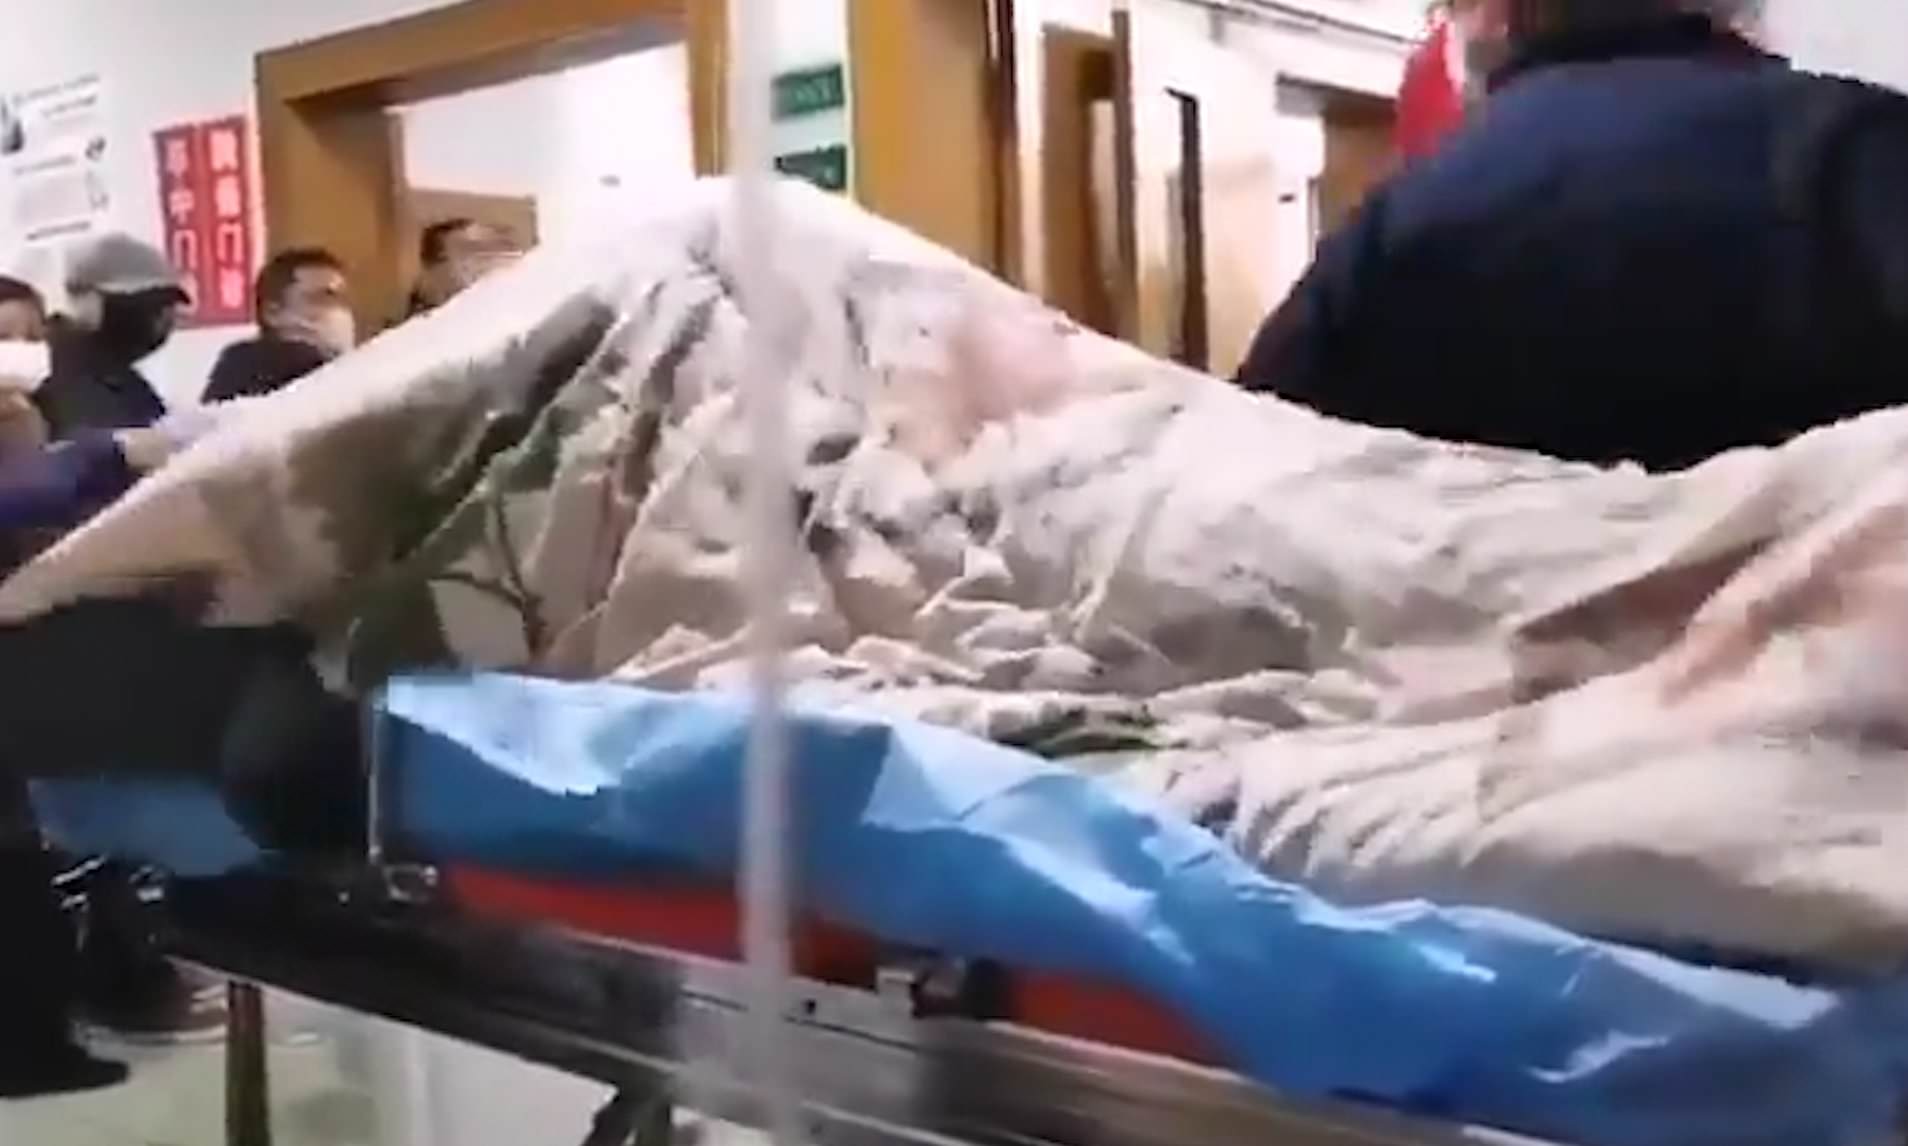 Distressing footage of 'coronavirus patient writhing on hospital trolley in infection-hit Wuhan' is shared online - as Chinese authorities continue to delete 'fake' videos of deadly outbreak